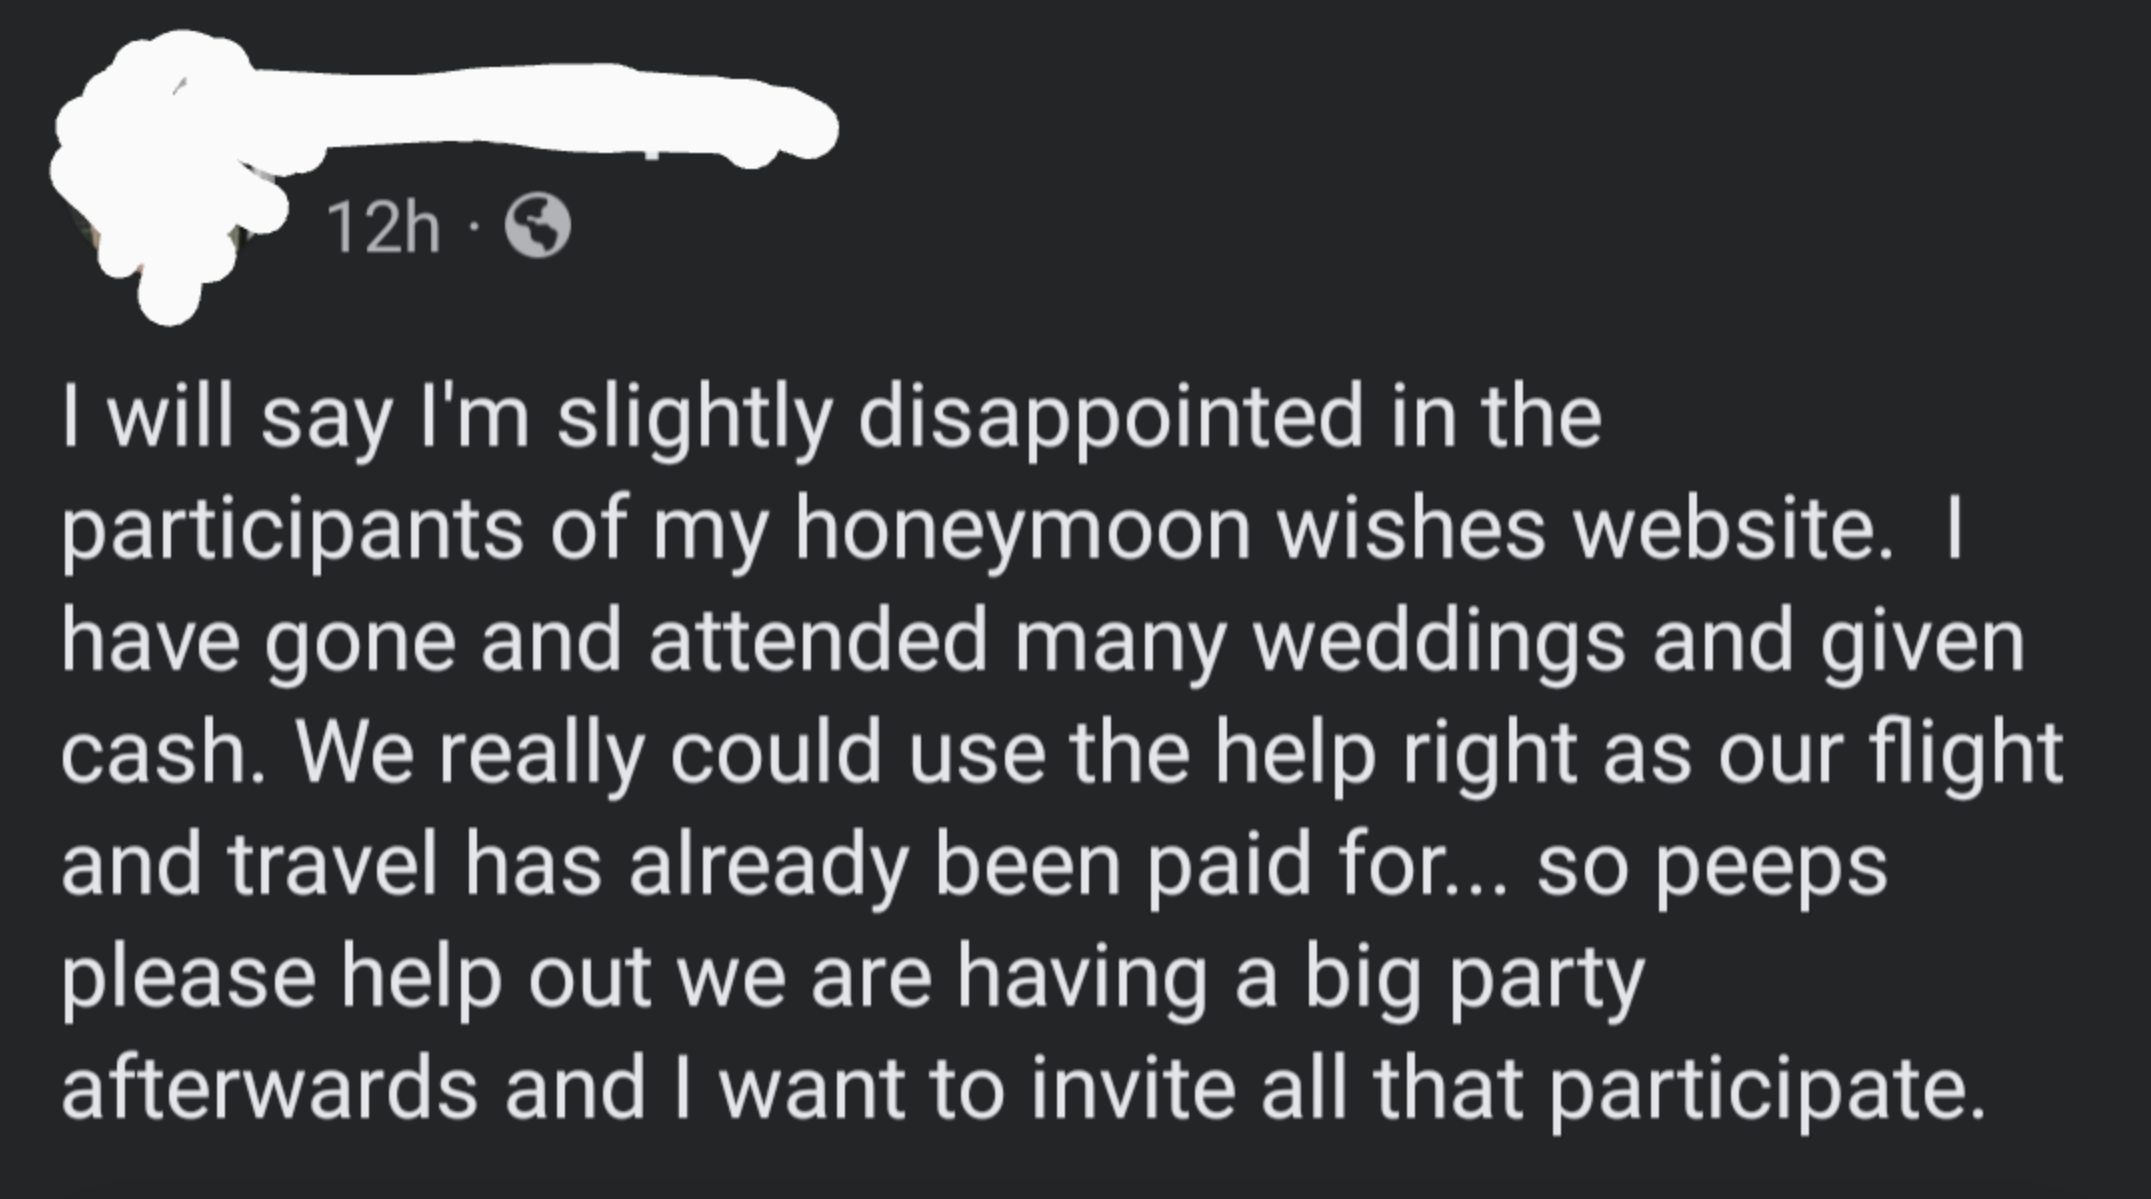 &quot;I will say I&#x27;m slightly disappointed in the participants of my honeymoon wishes website.&quot;